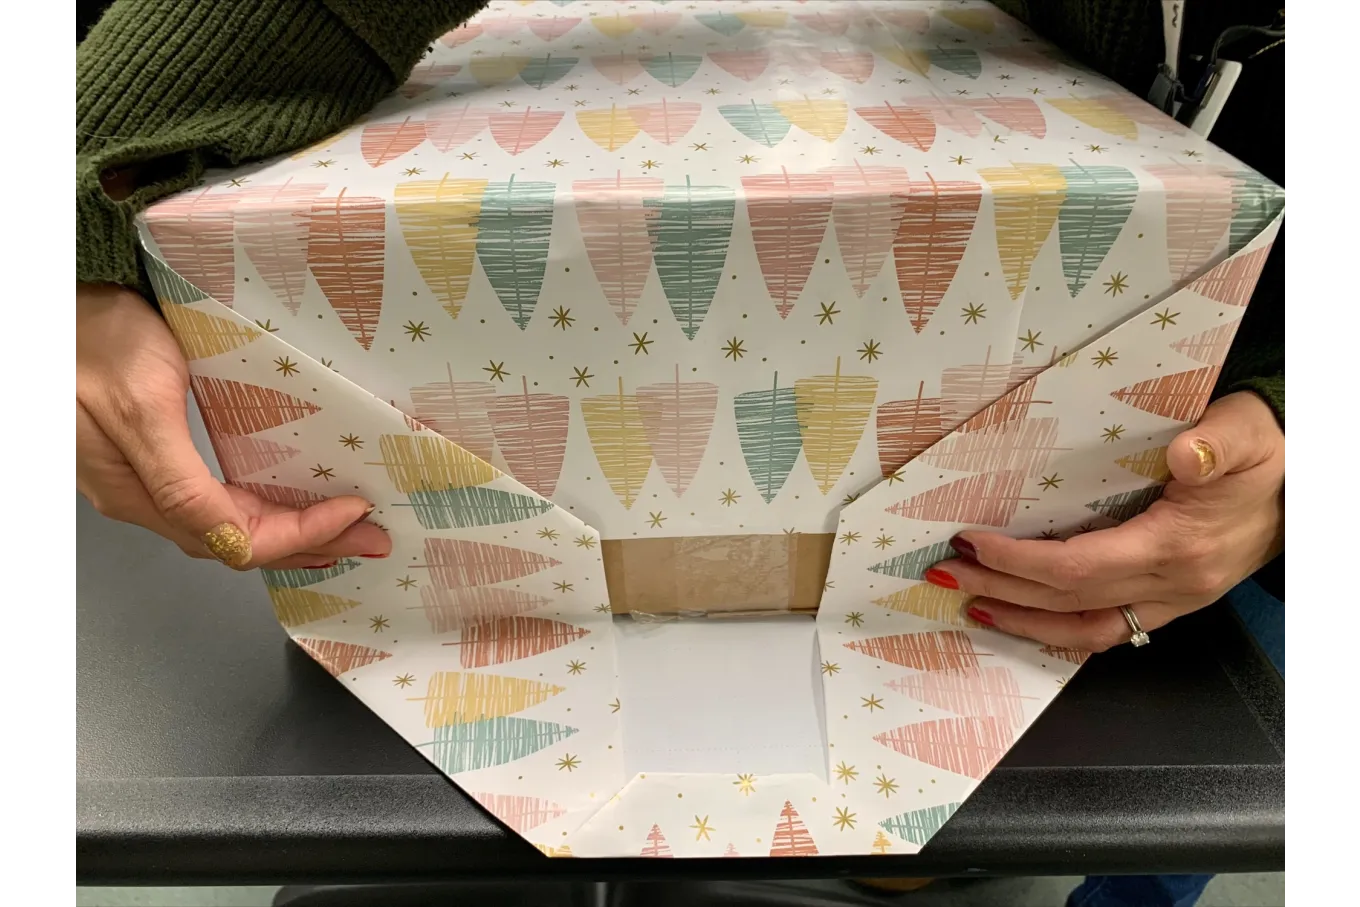 a box being wrapped in multicolored holiday wrapping paper